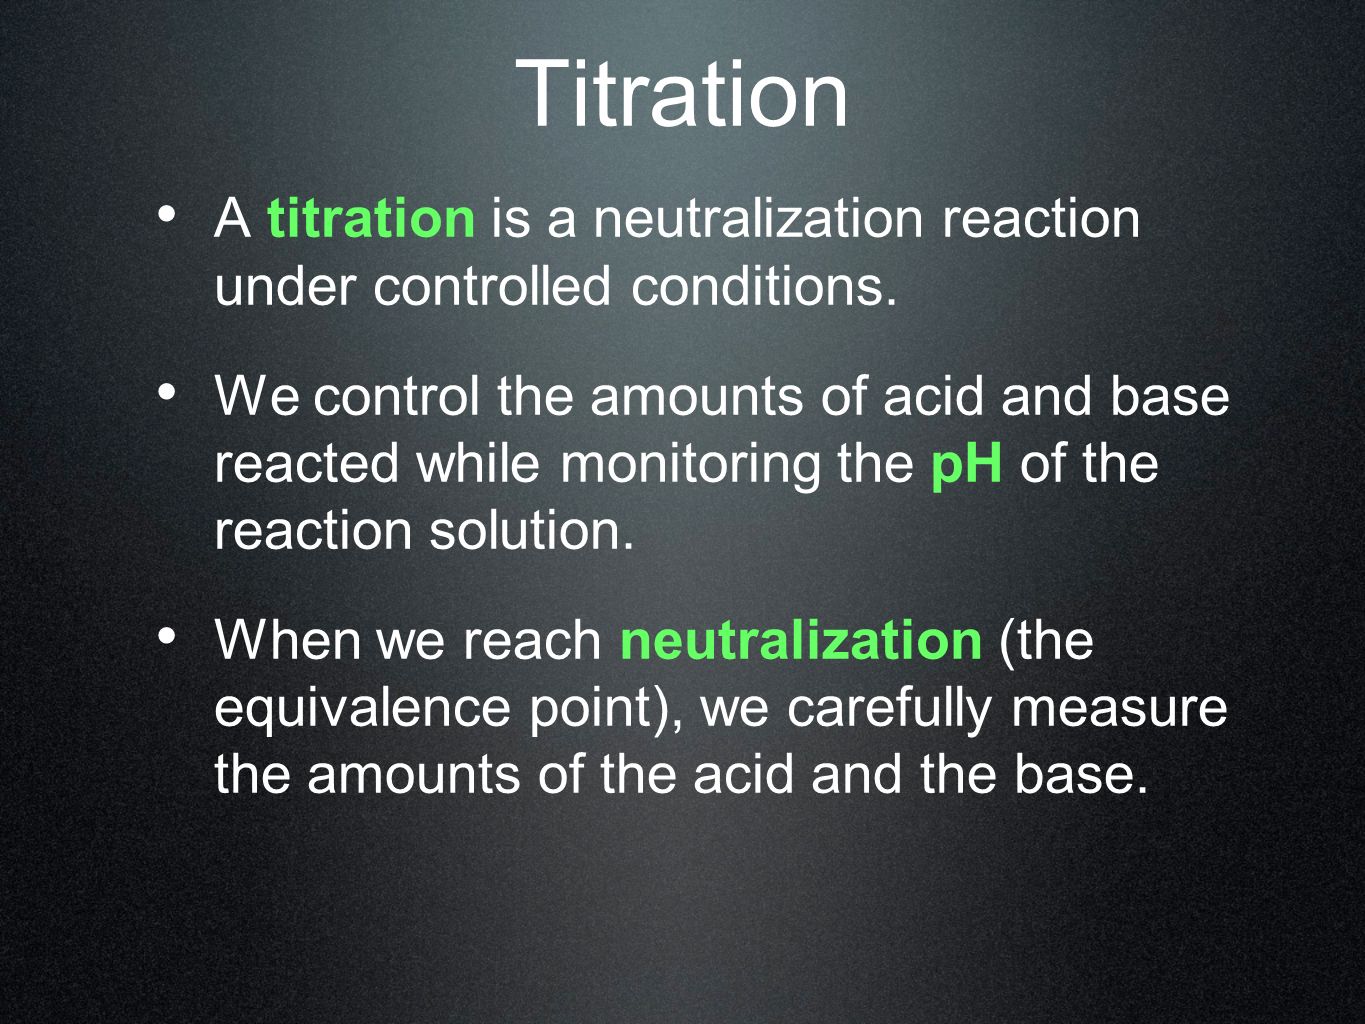 Titration A titration is a neutralization reaction under controlled conditions.